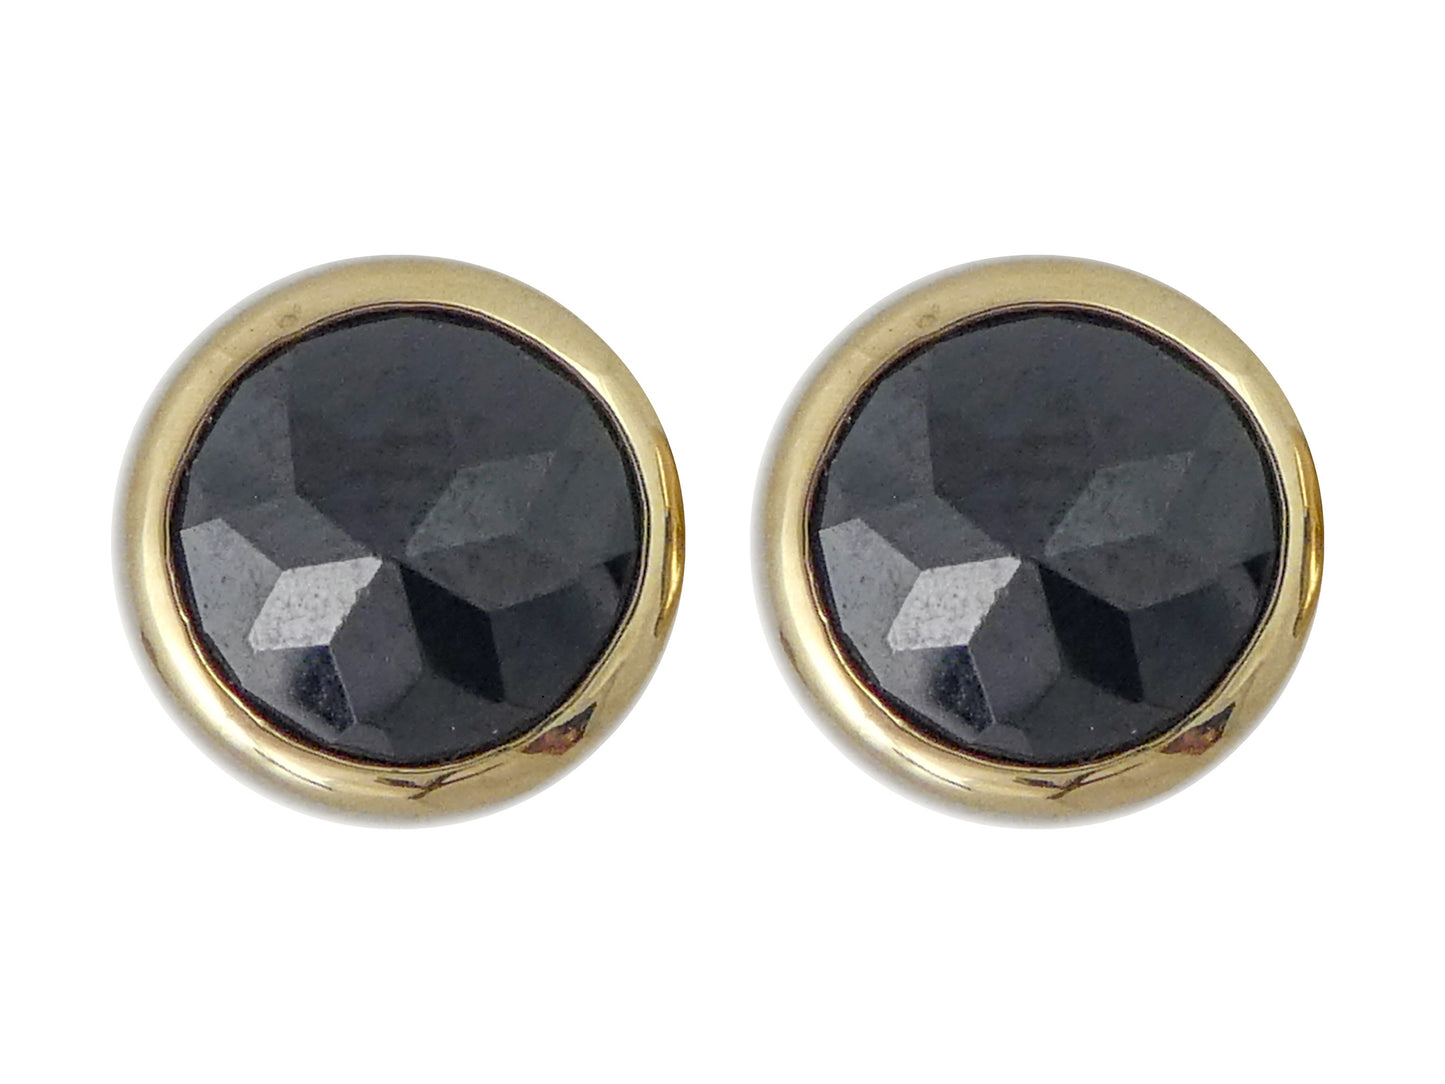 Large Black and Gold Spike Earrings - 8mm black spinel and 14k yellow gold round stud earrings | Ready to Ship